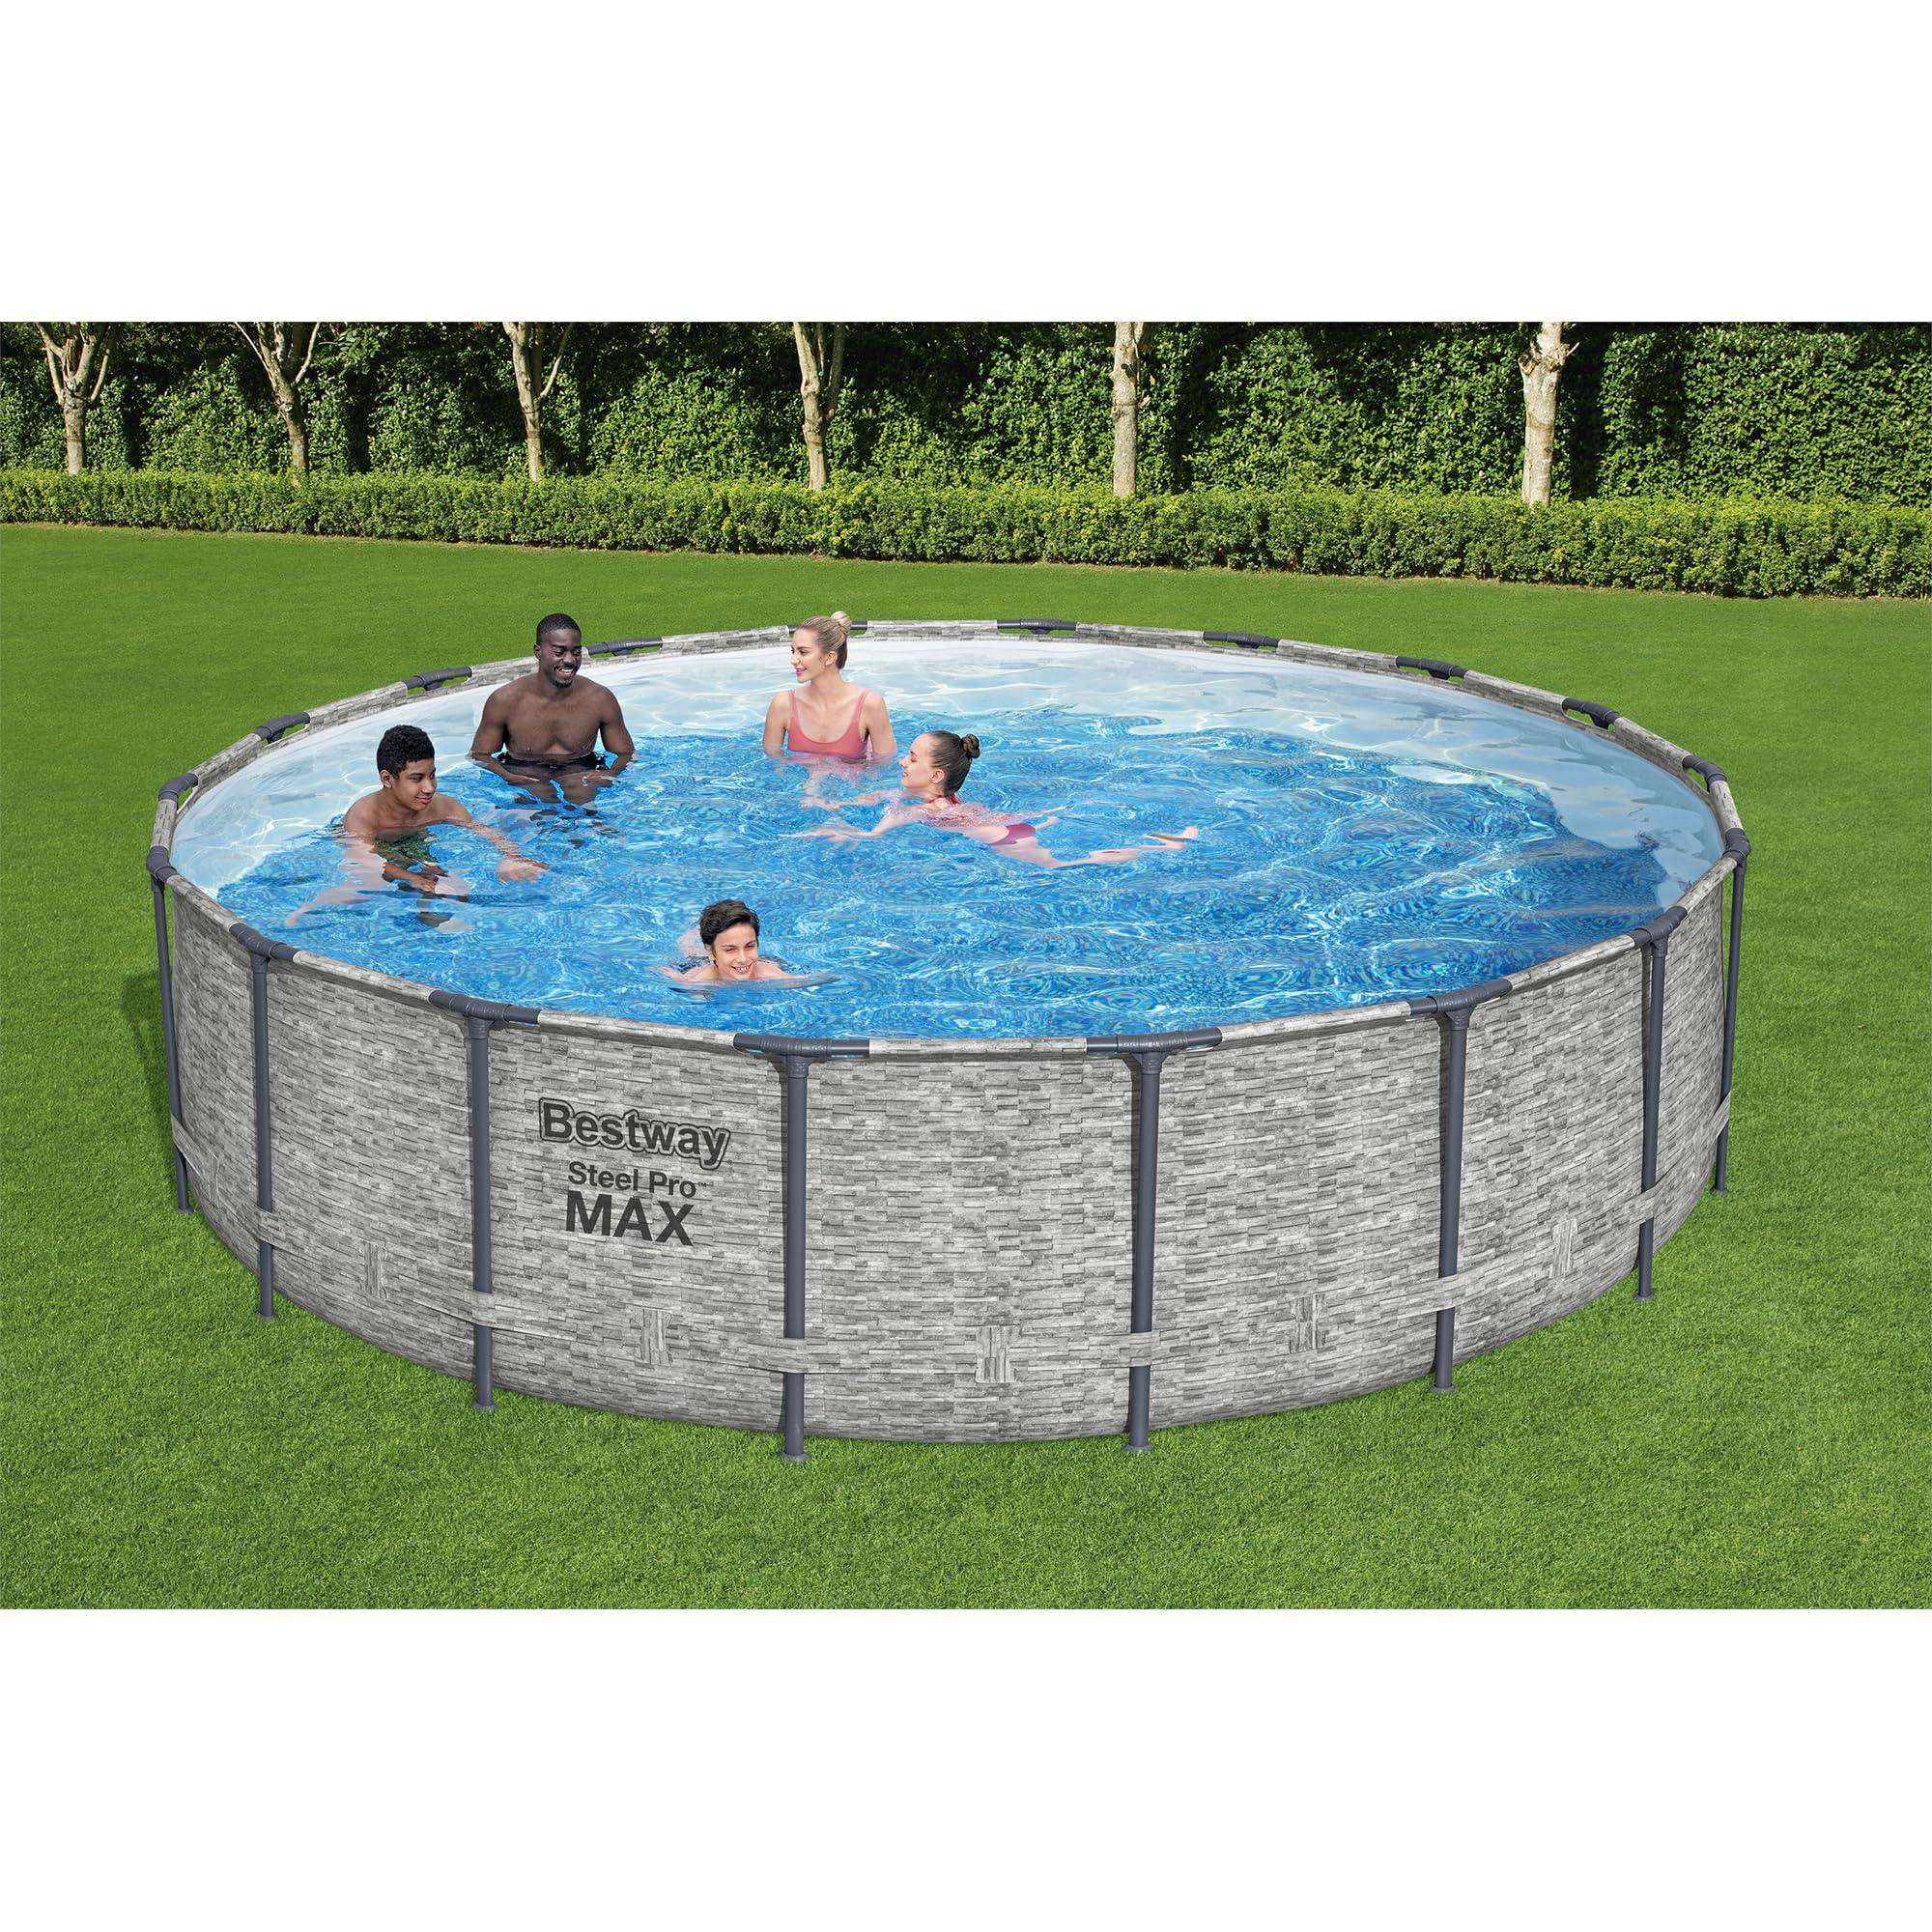 Bestway Steel Pro MAX 18’ x 48” Round Above Ground Pool Set | Frame Swmiming Pool Features Realistic Stone Print Liner | Includes 1500gal Filter Pump, 48" Ladder and 18' Pool Cover